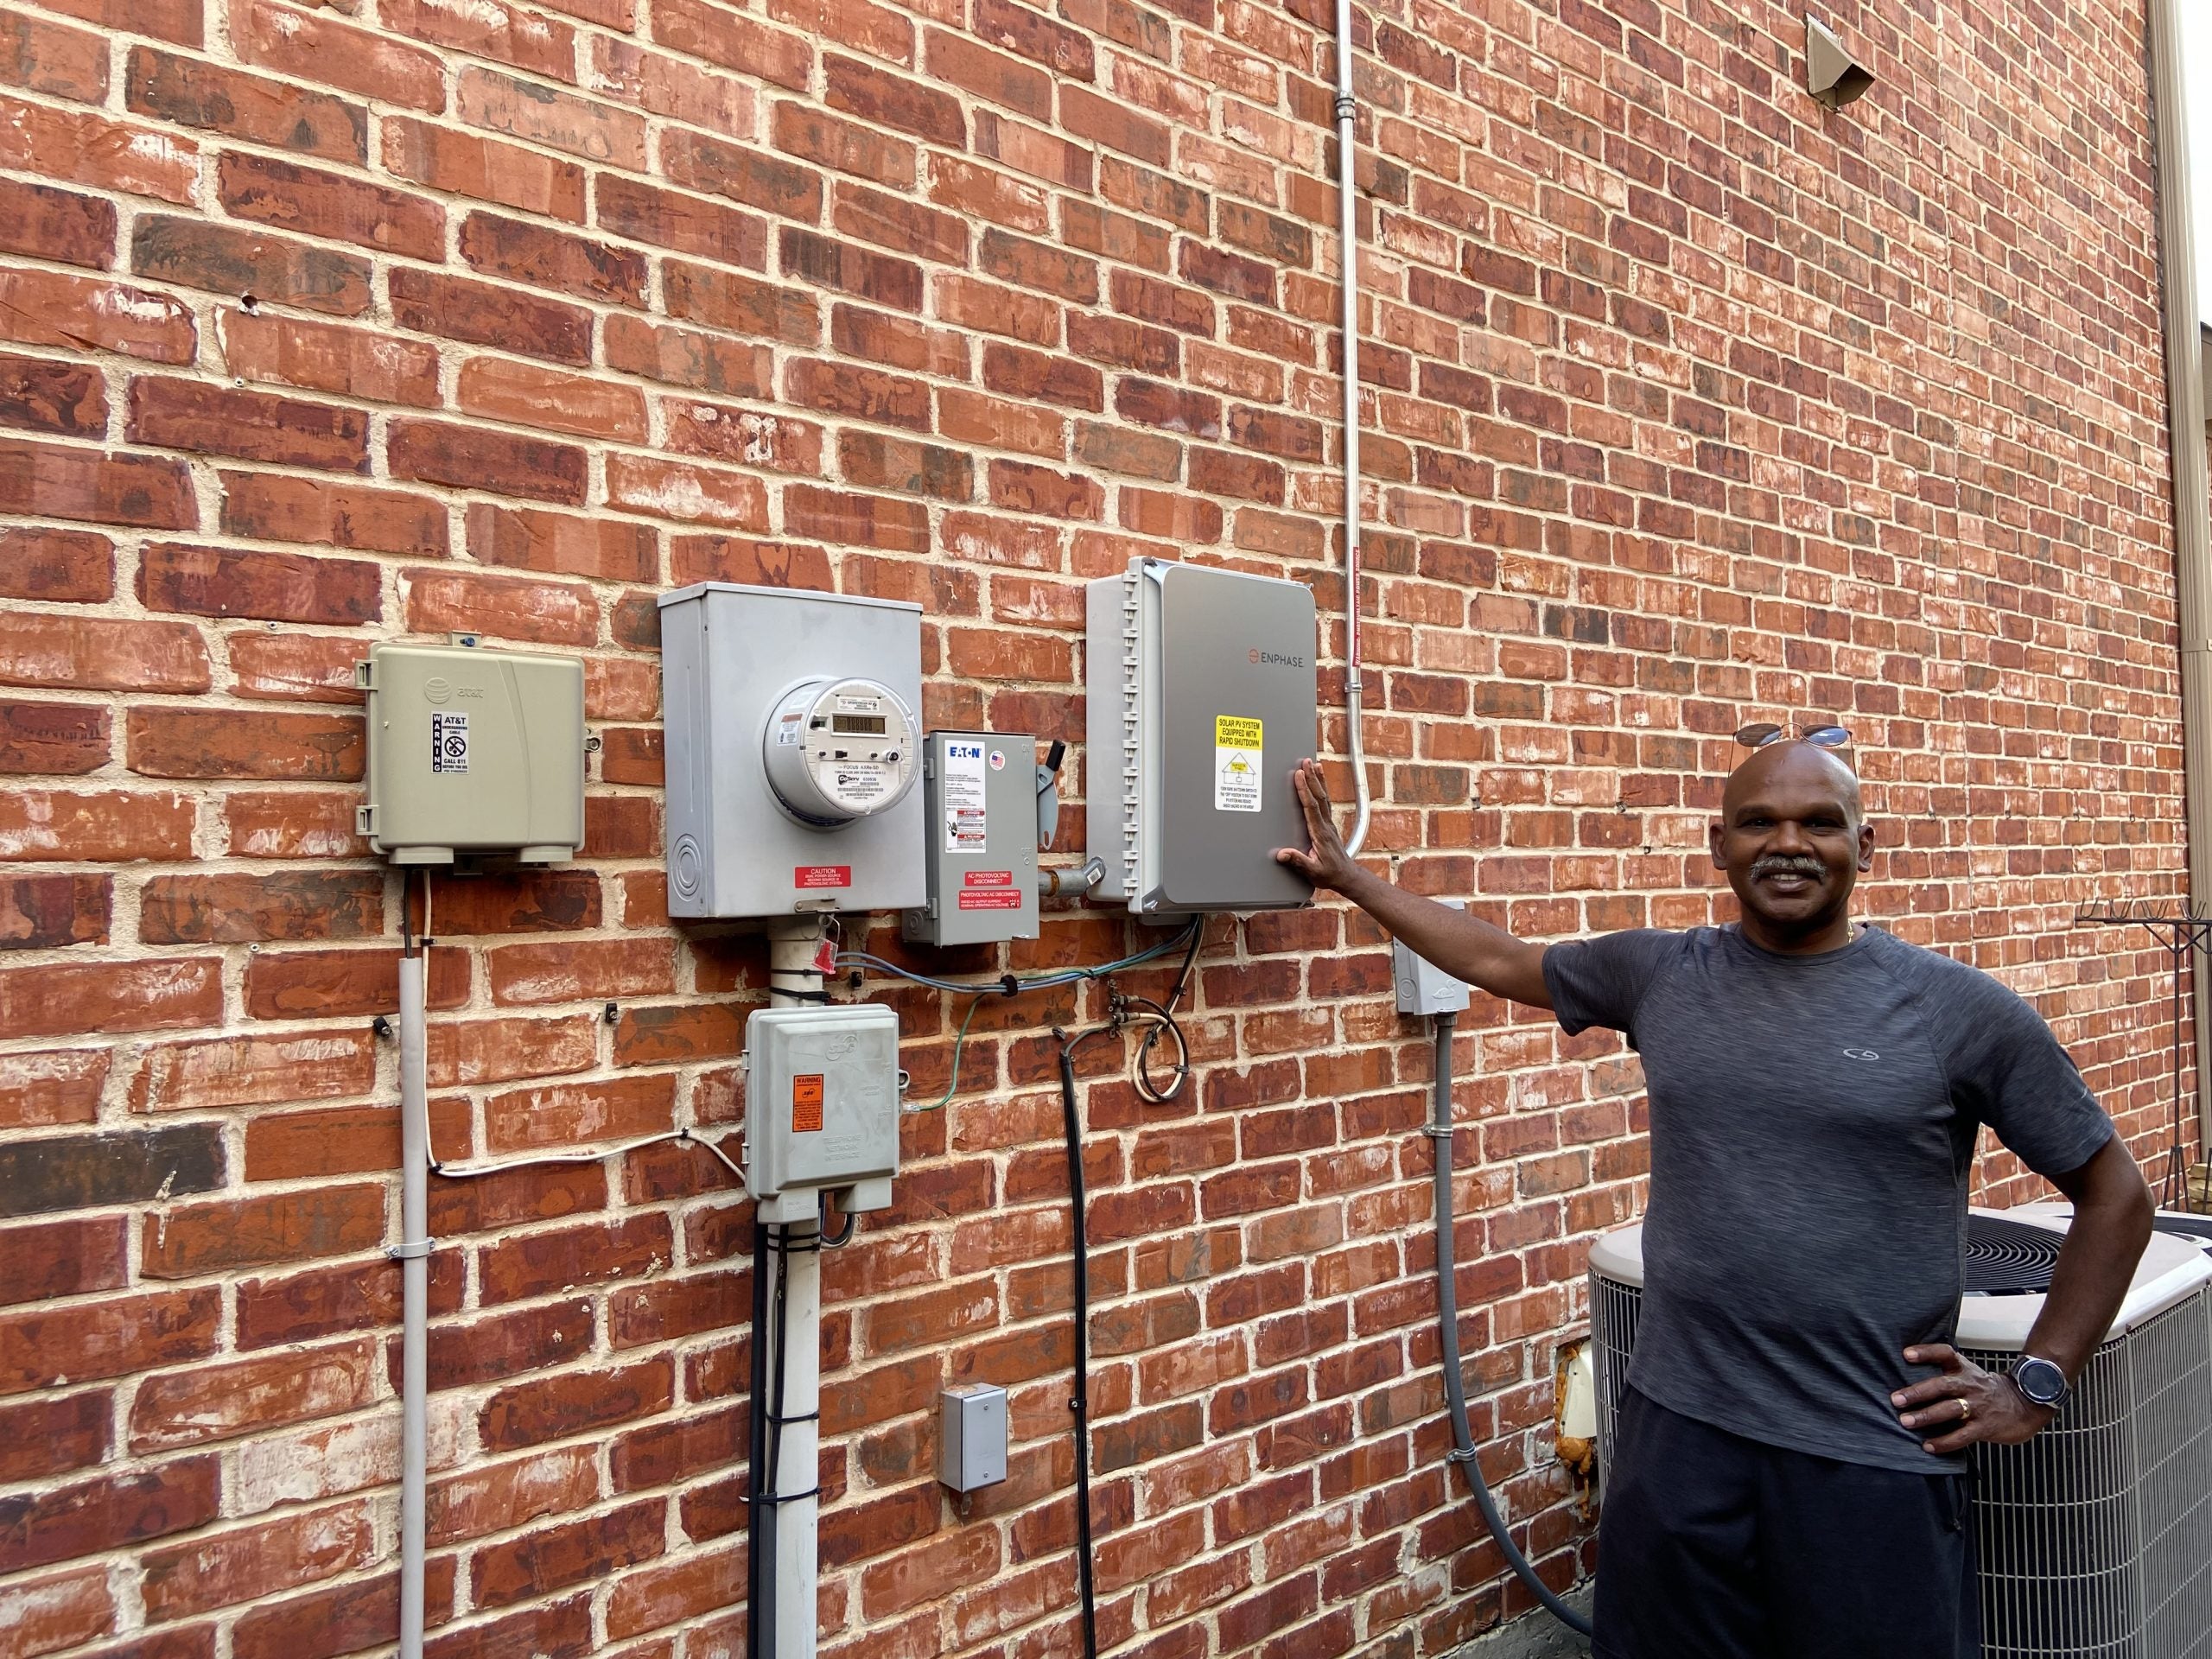 Solar homeowner stands next to his inverter and electric meter